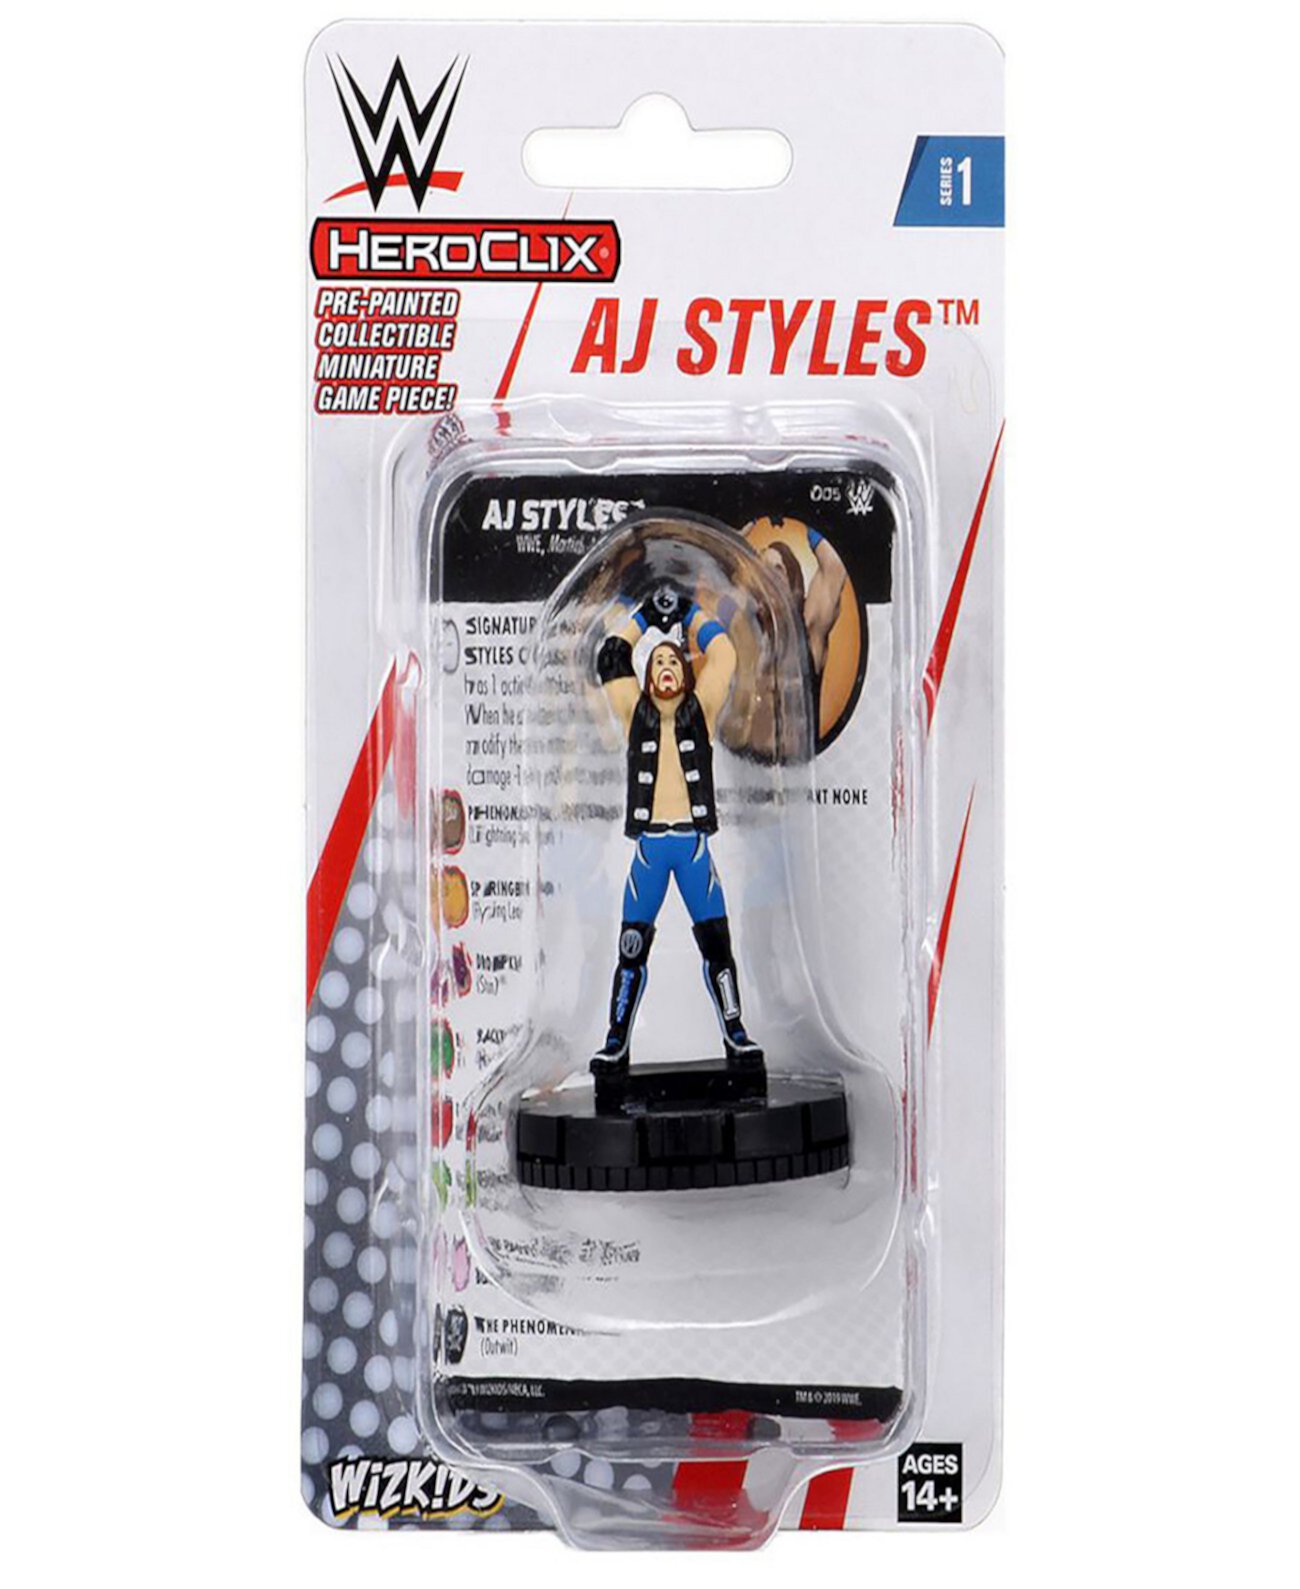 WWE HeroClix AJ Styles Expansion Pack Miniatures Game WizKids Games